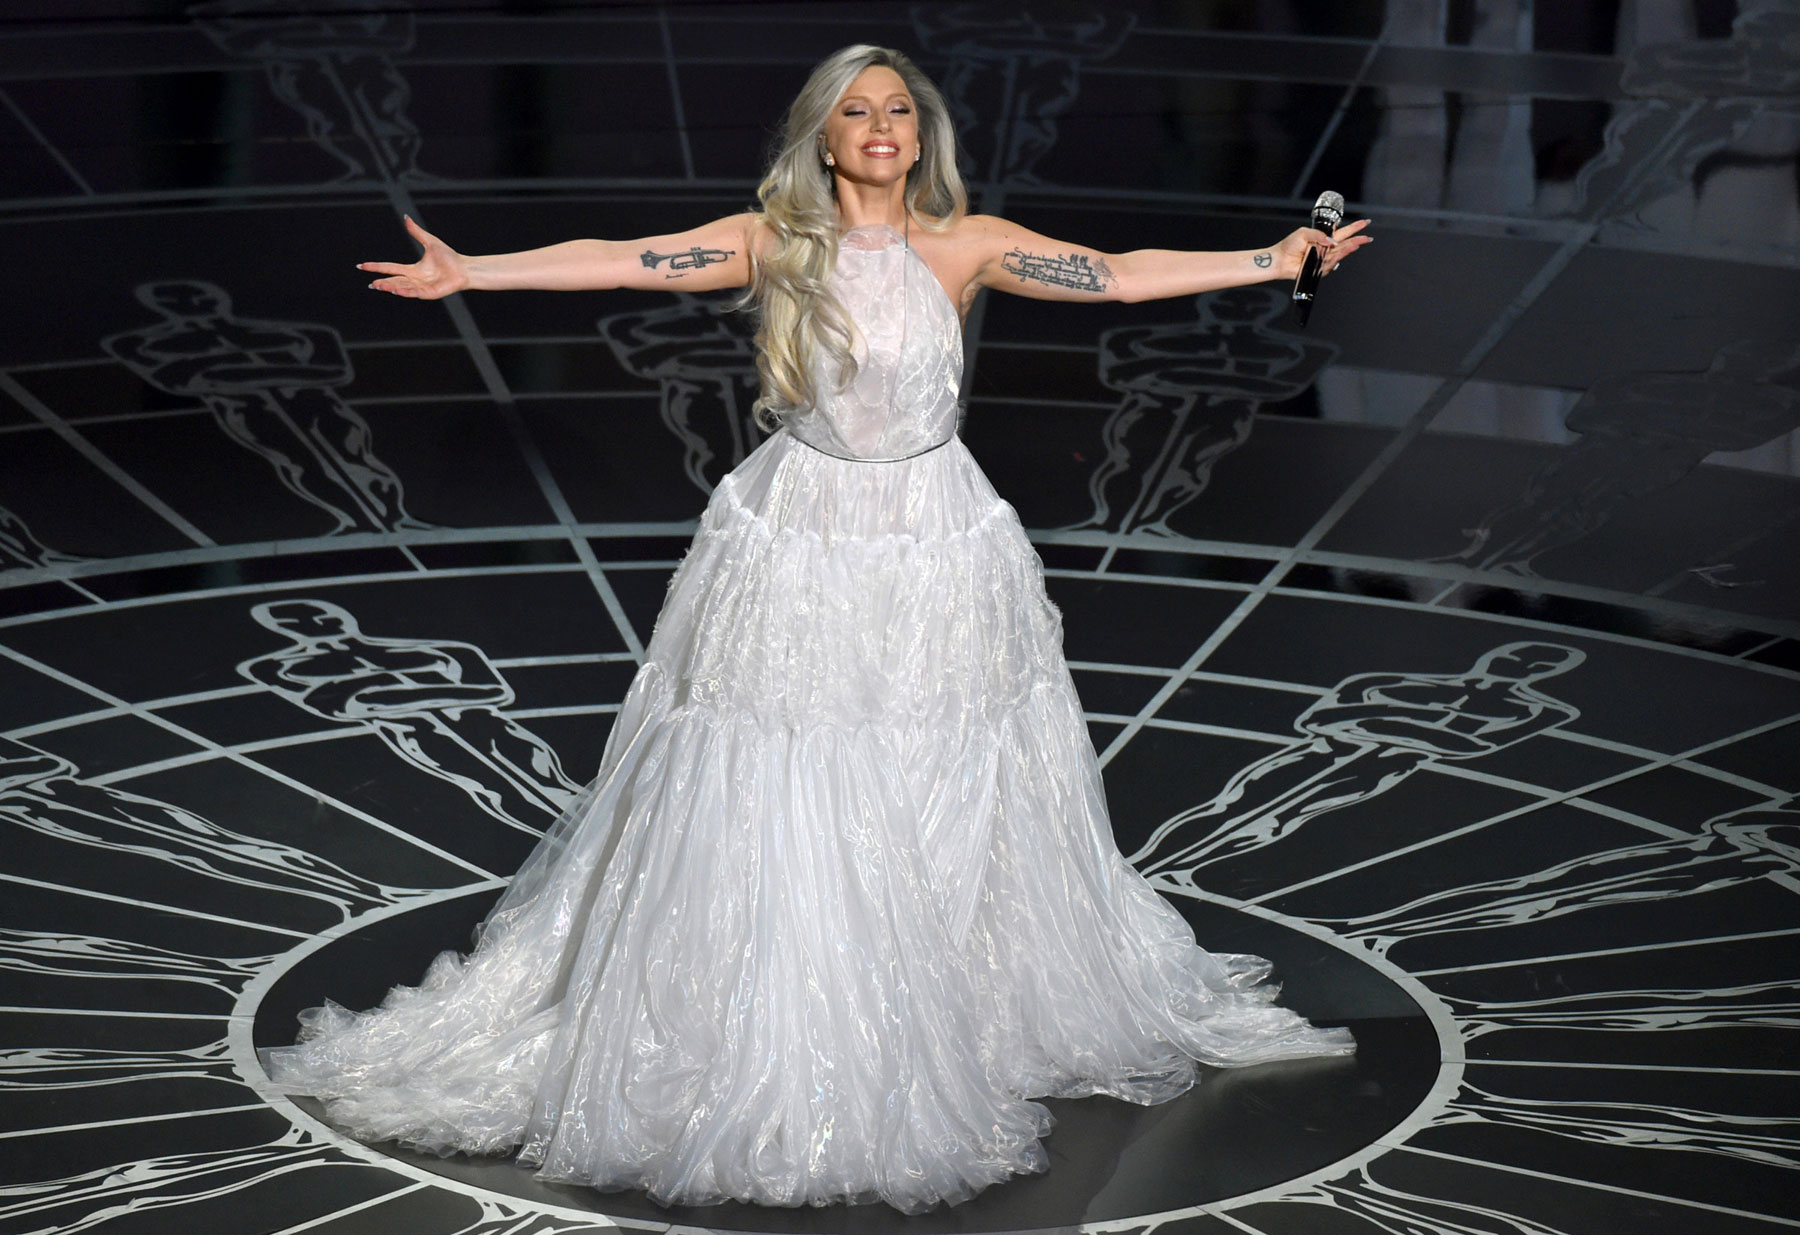 Lady Gaga performs on stage at the Oscars on Sunday, Feb. 22, 2015, at the Dolby Theatre in Los Angeles. (Photo by John Shearer/Invision/AP)